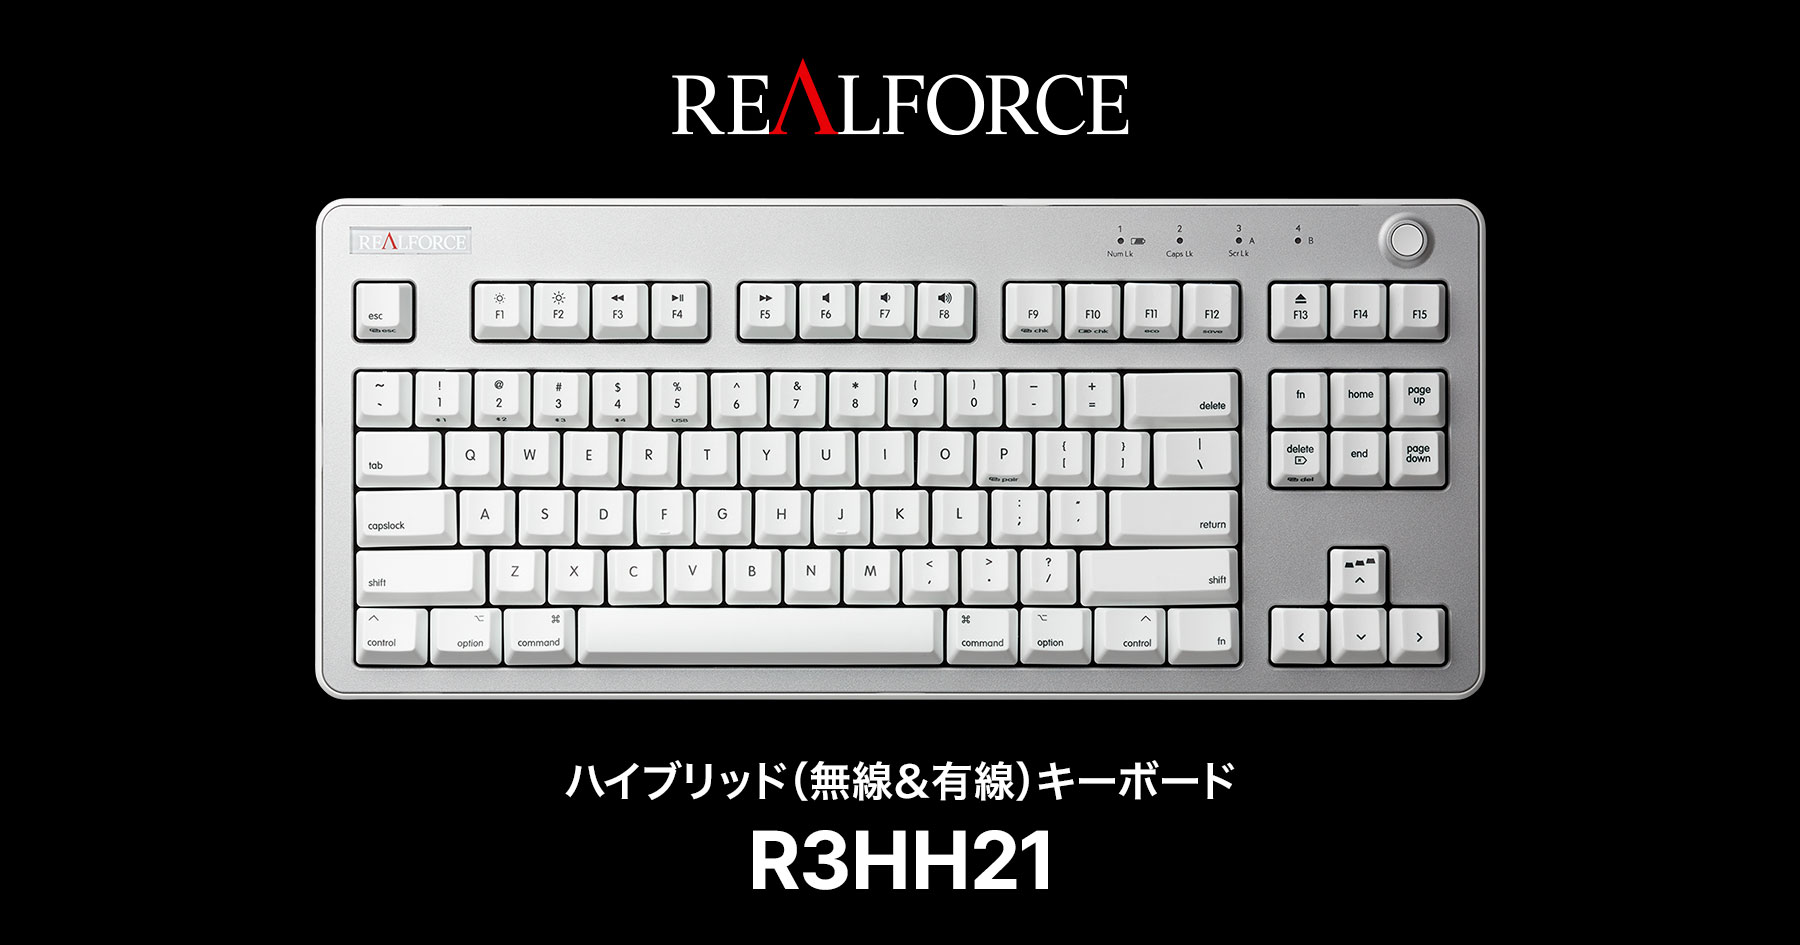 PC/タブレット PC周辺機器 製品 : REALFORCE R3 キーボード Mac 配列 / R3HH21 | REALFORCE 